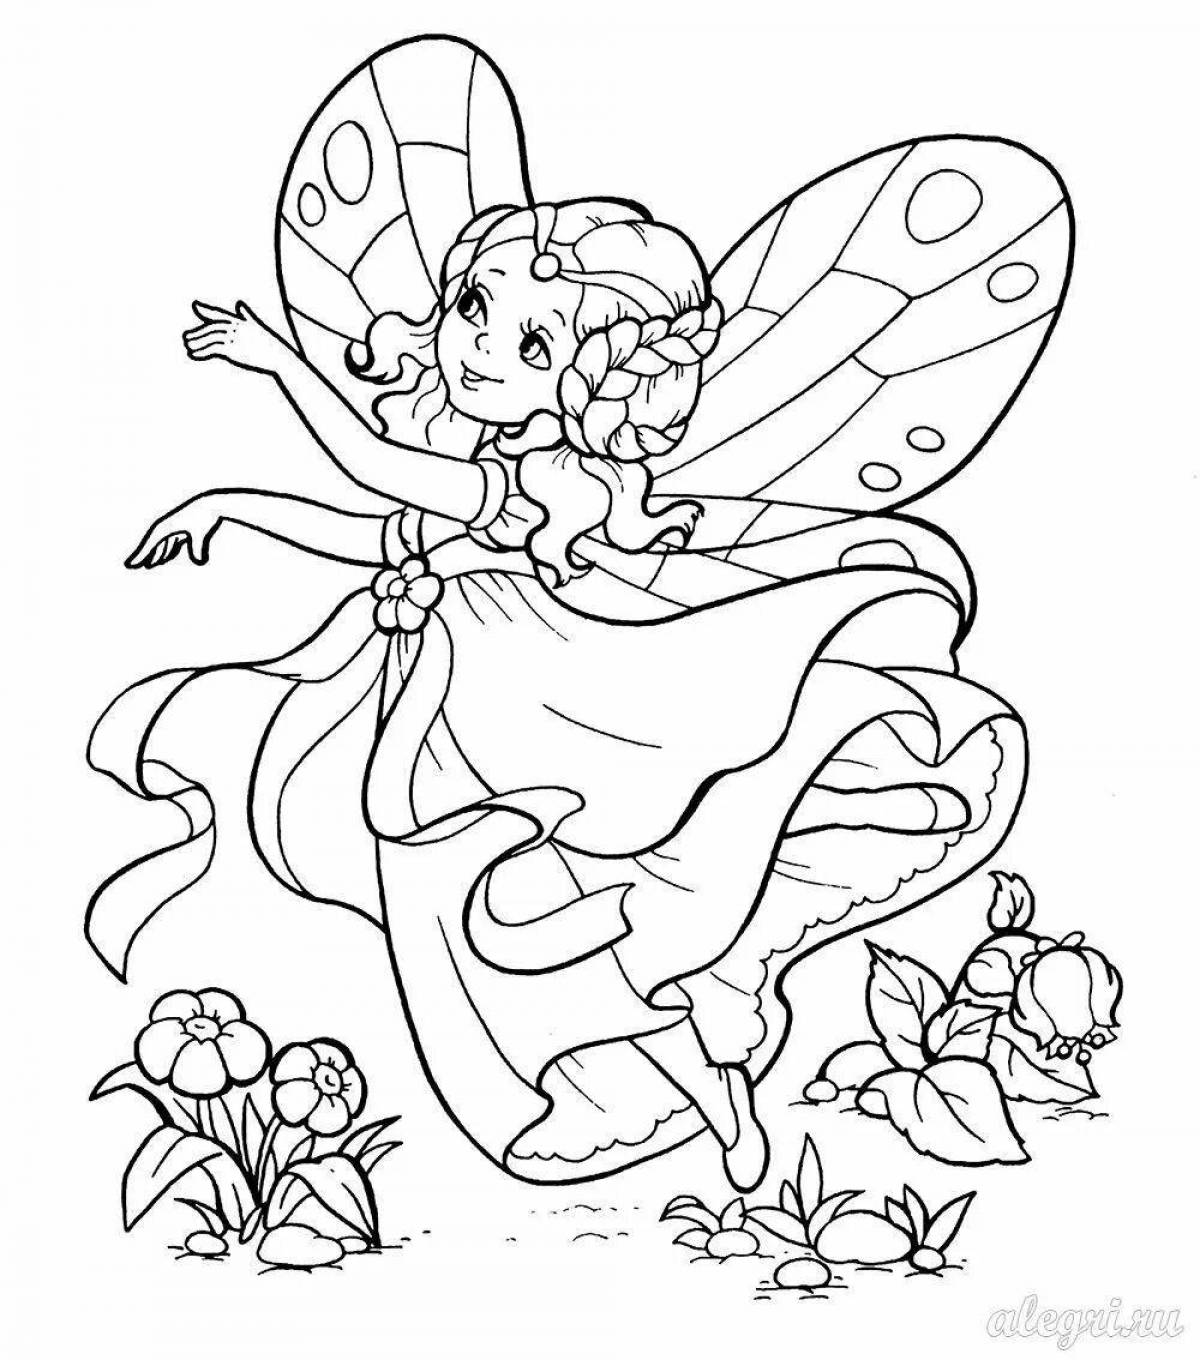 Adorable fairy coloring pages for kids 5-6 years old